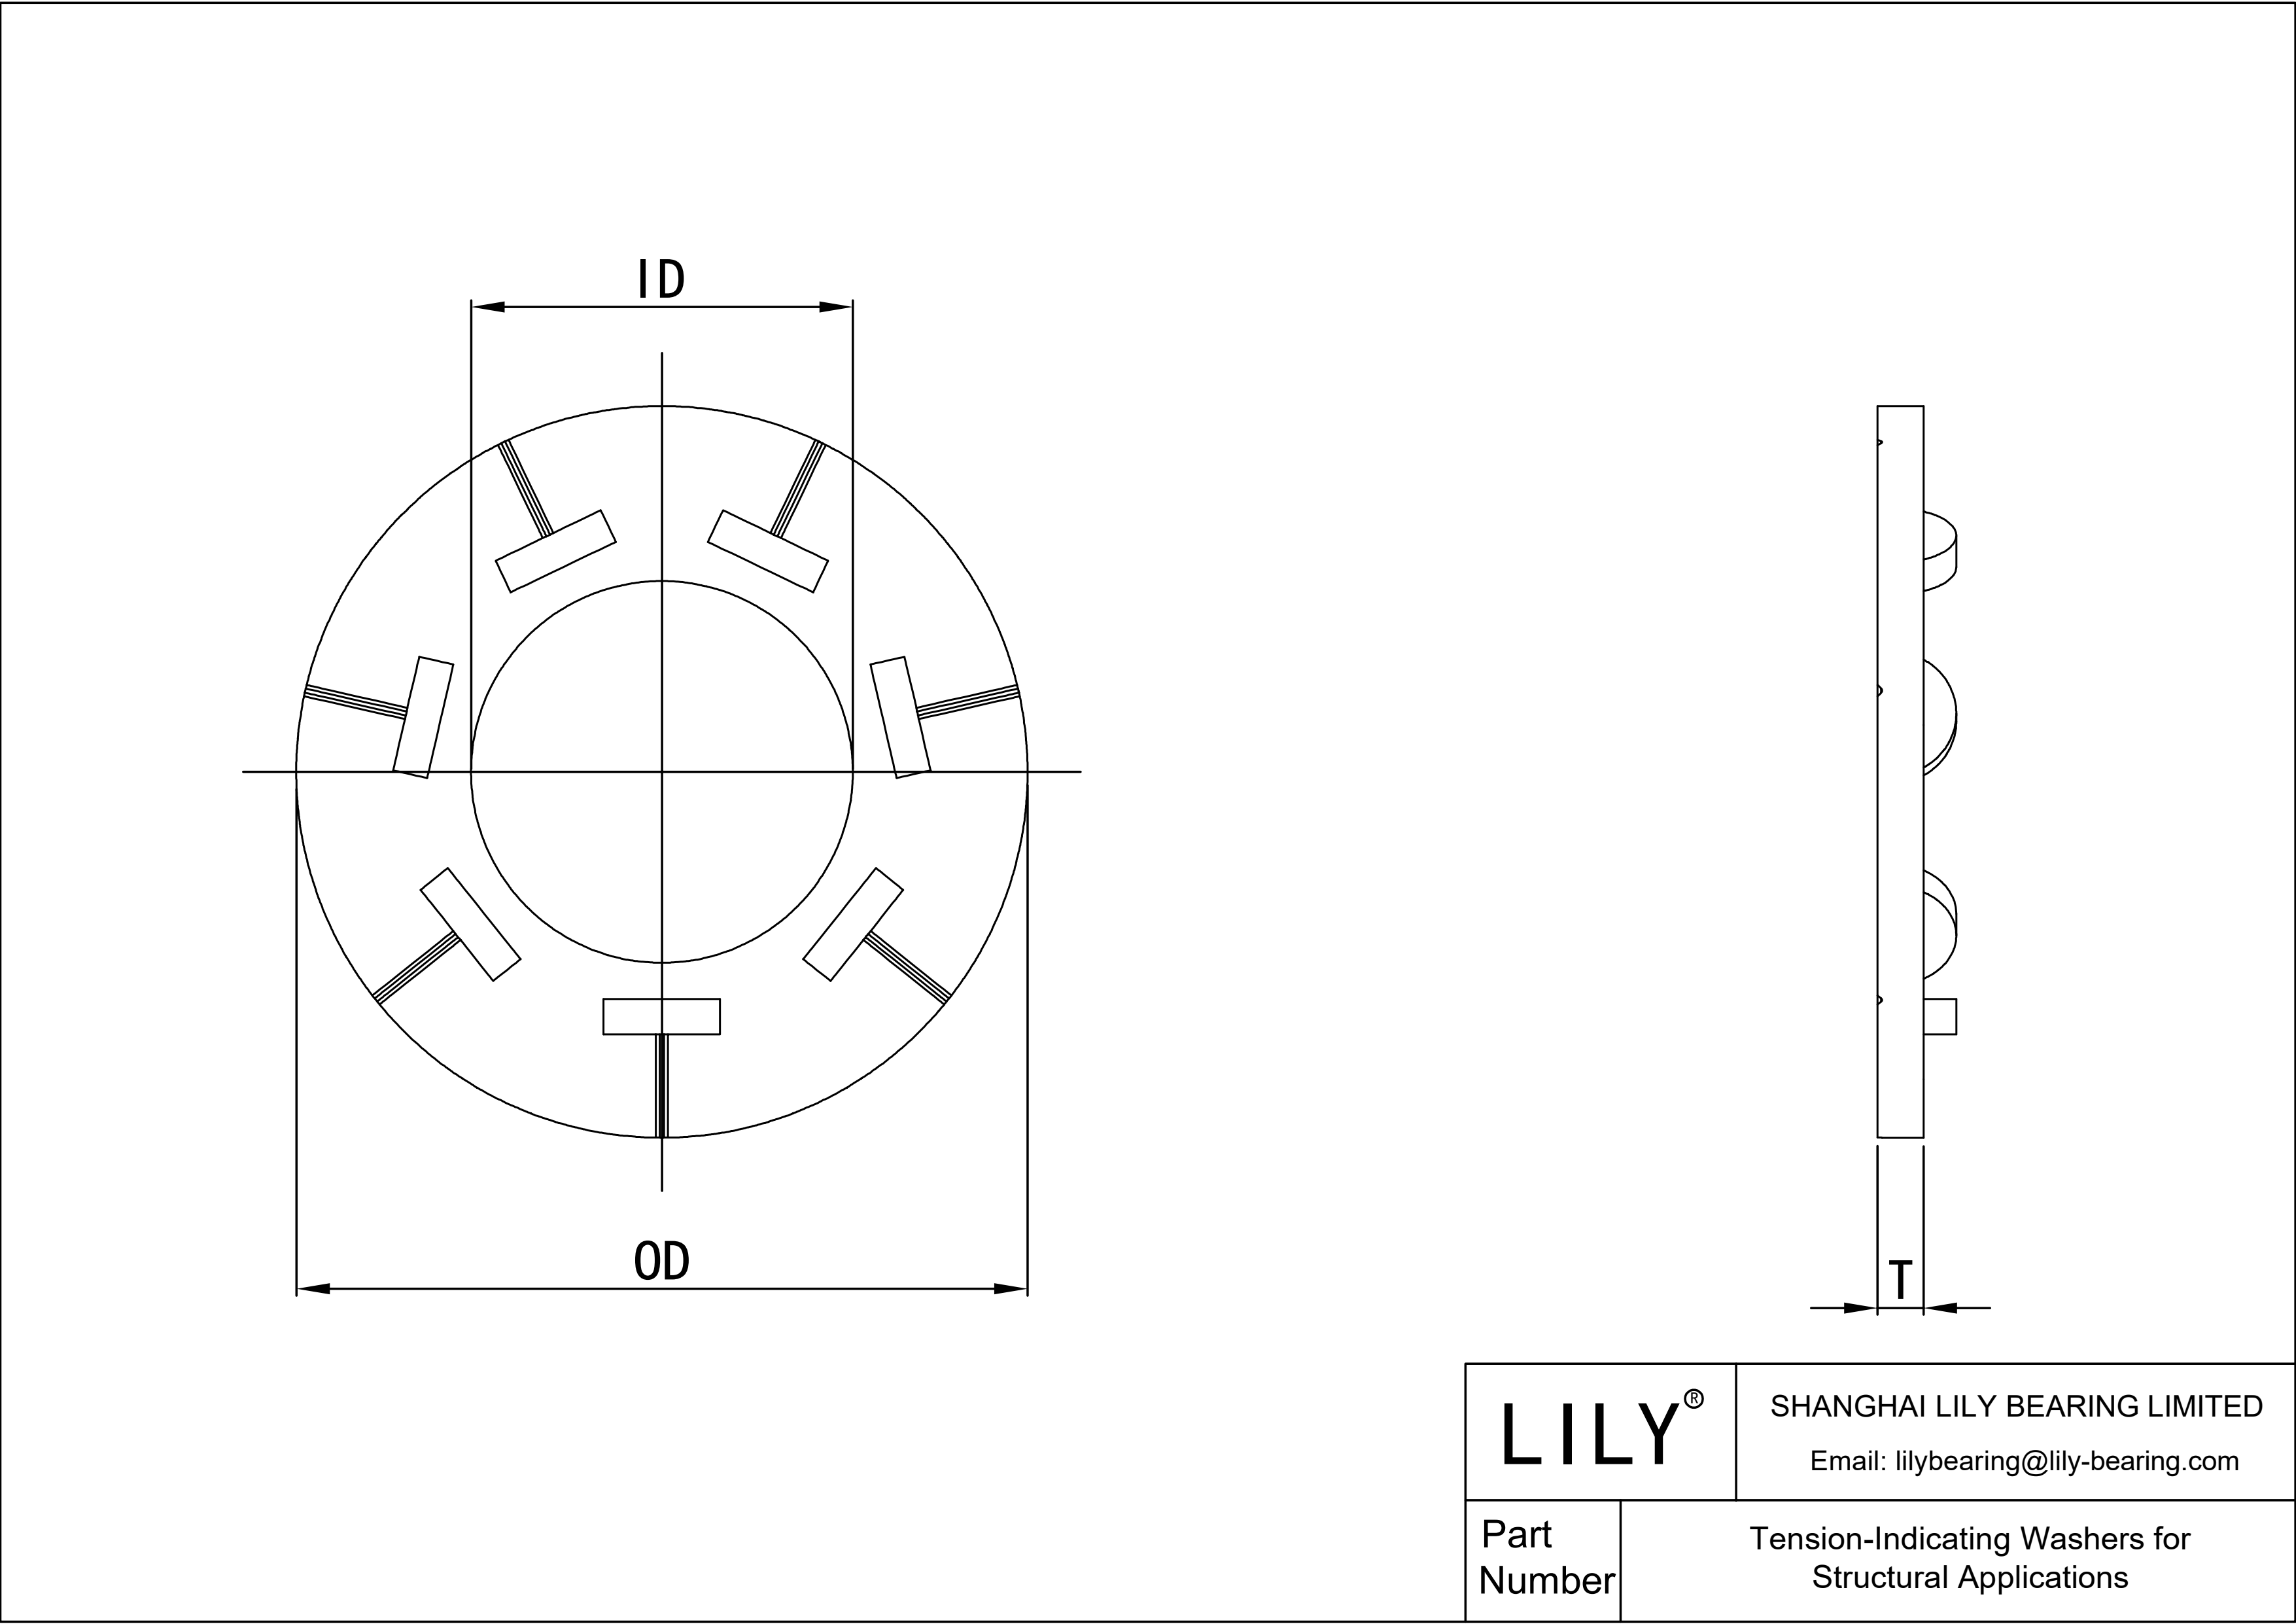 JFDBIABCA Tension-Indicating Washers for Structural Applications cad drawing